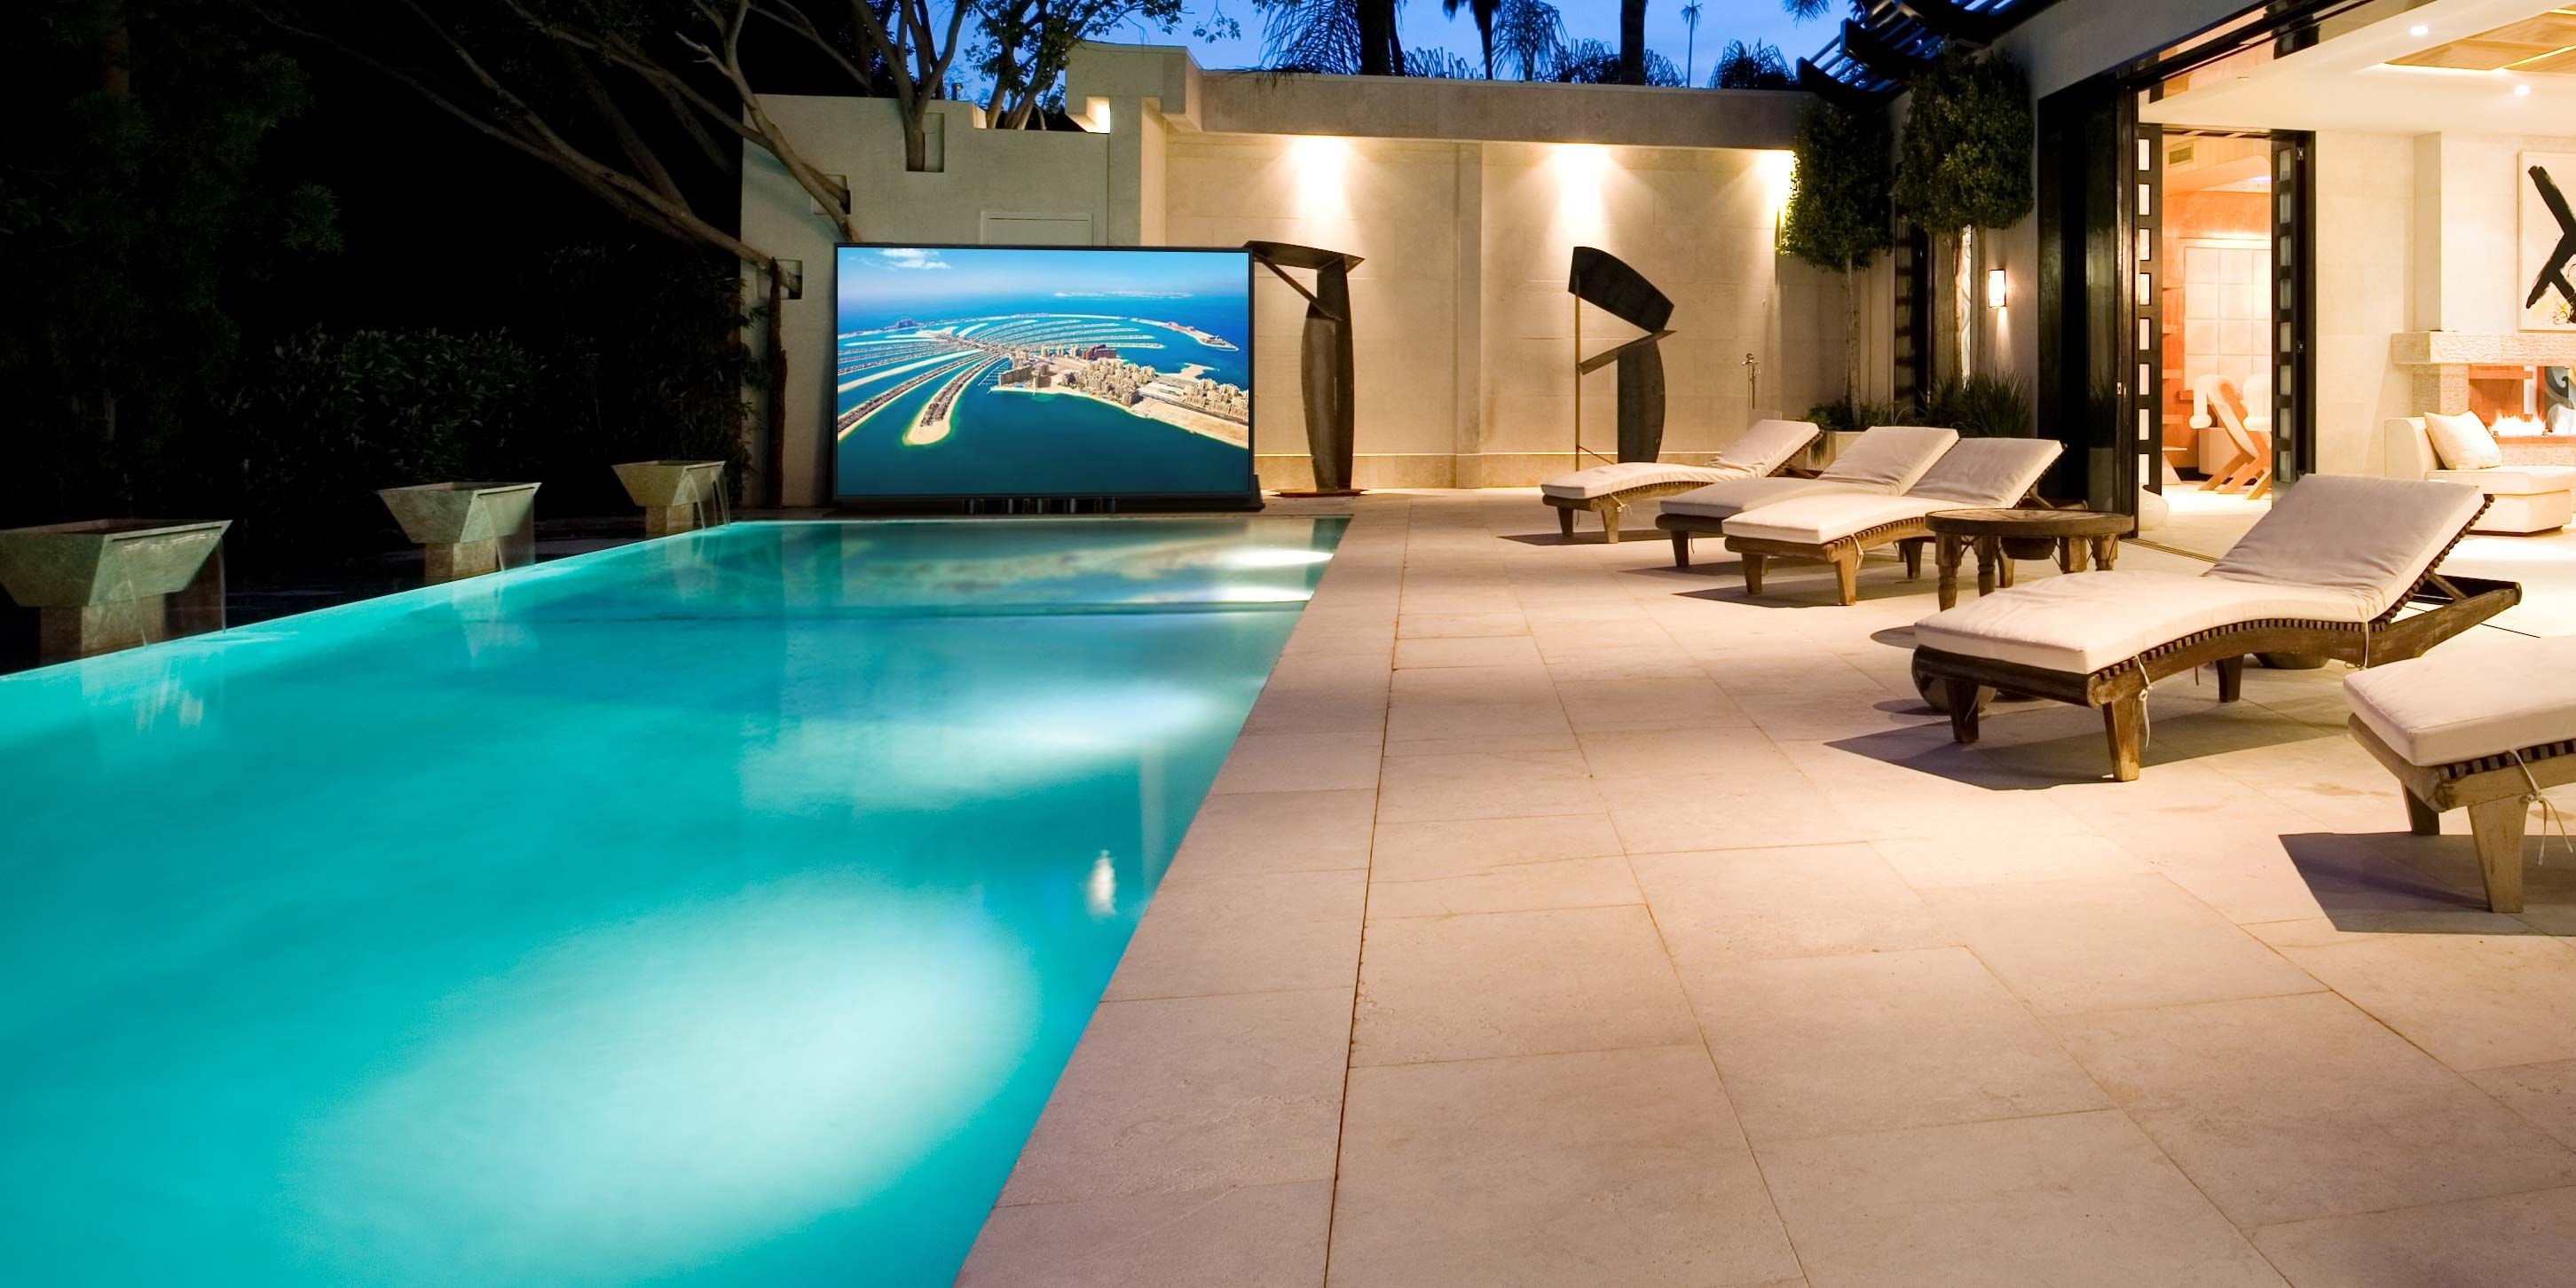 outdoor lounge area with a pool and motorized TV lift by Nexus 21